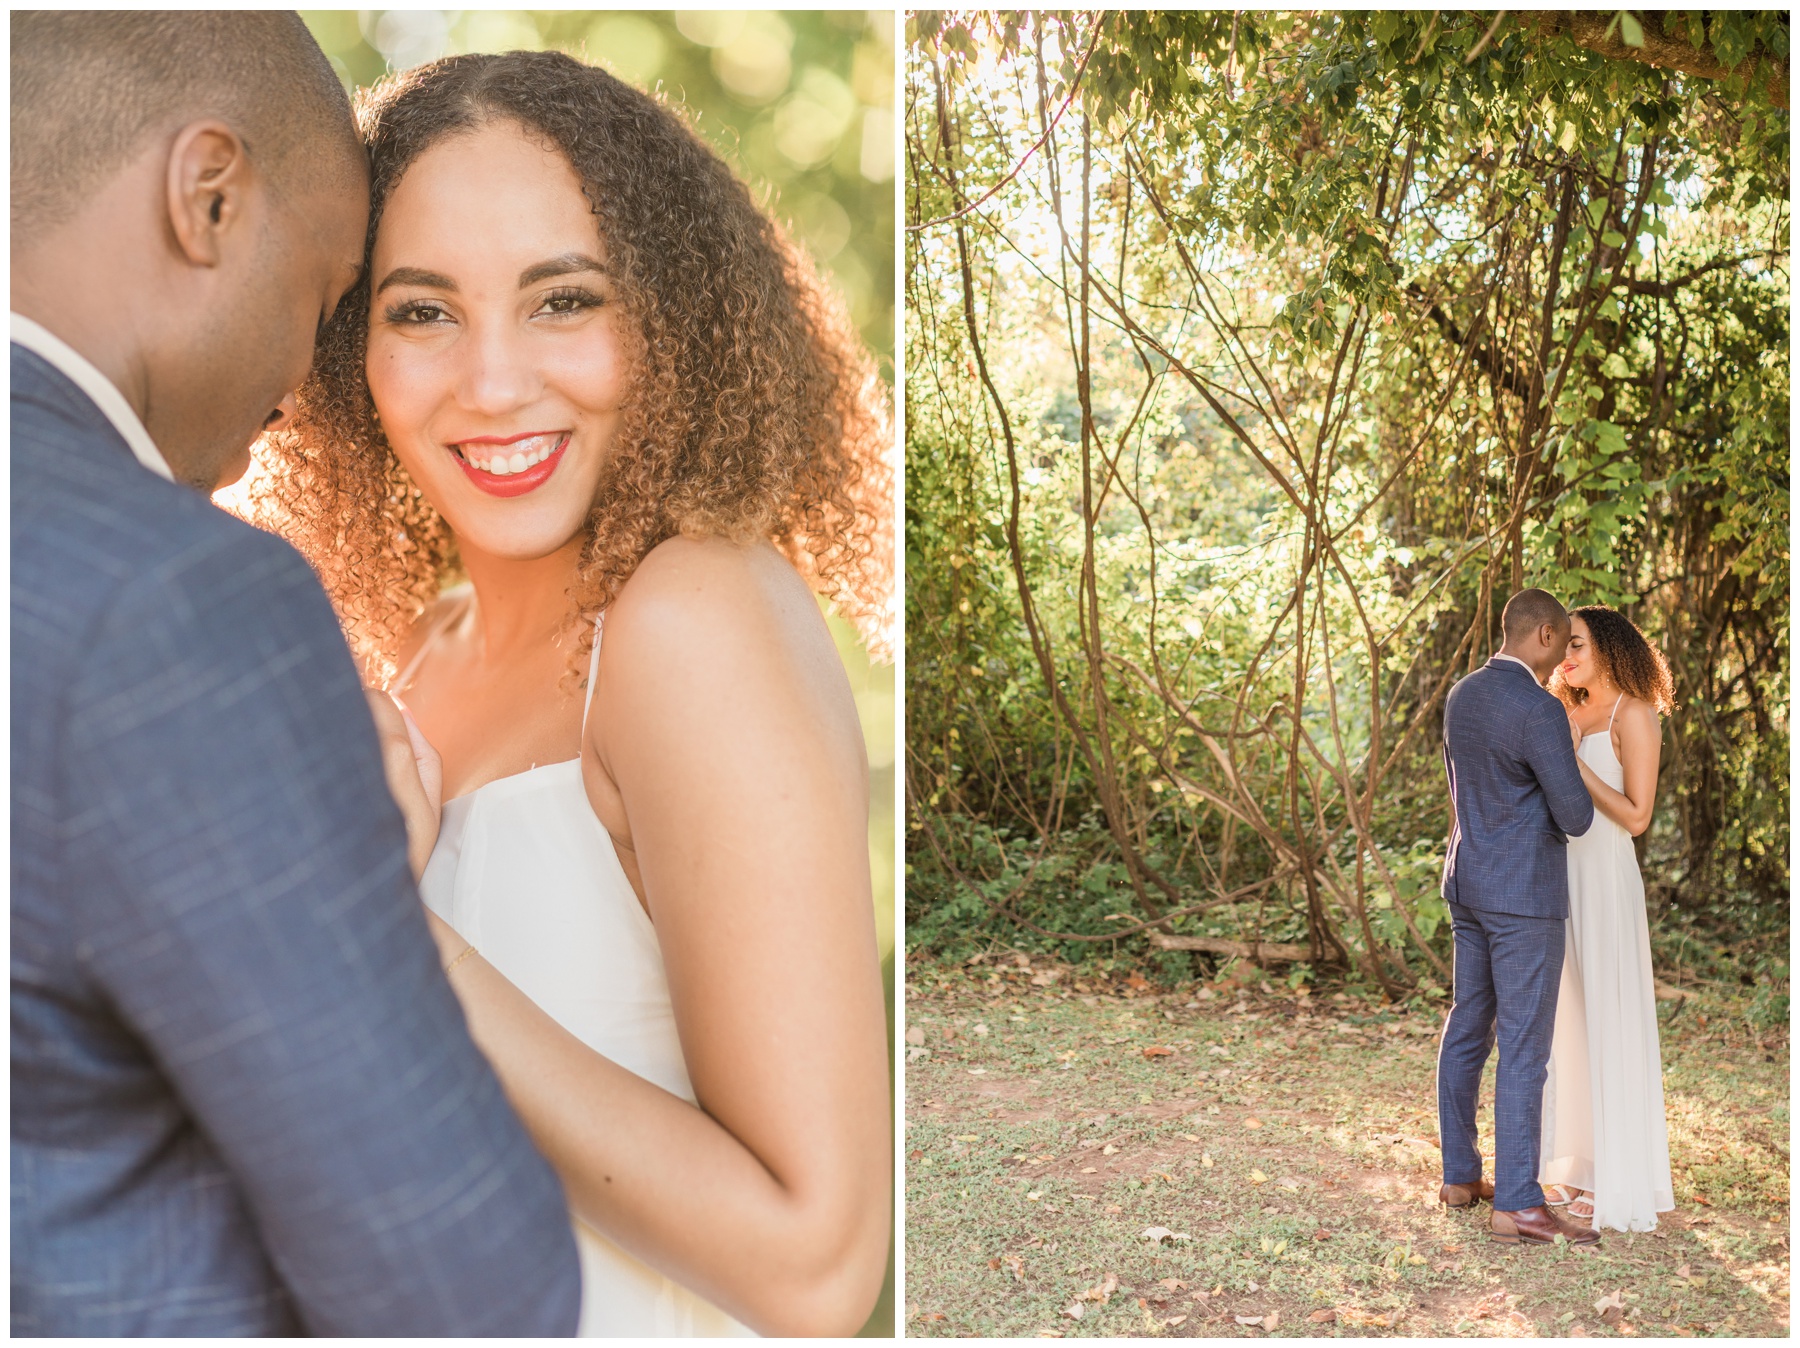 Locations for an outdoor engagement session in the Houston area